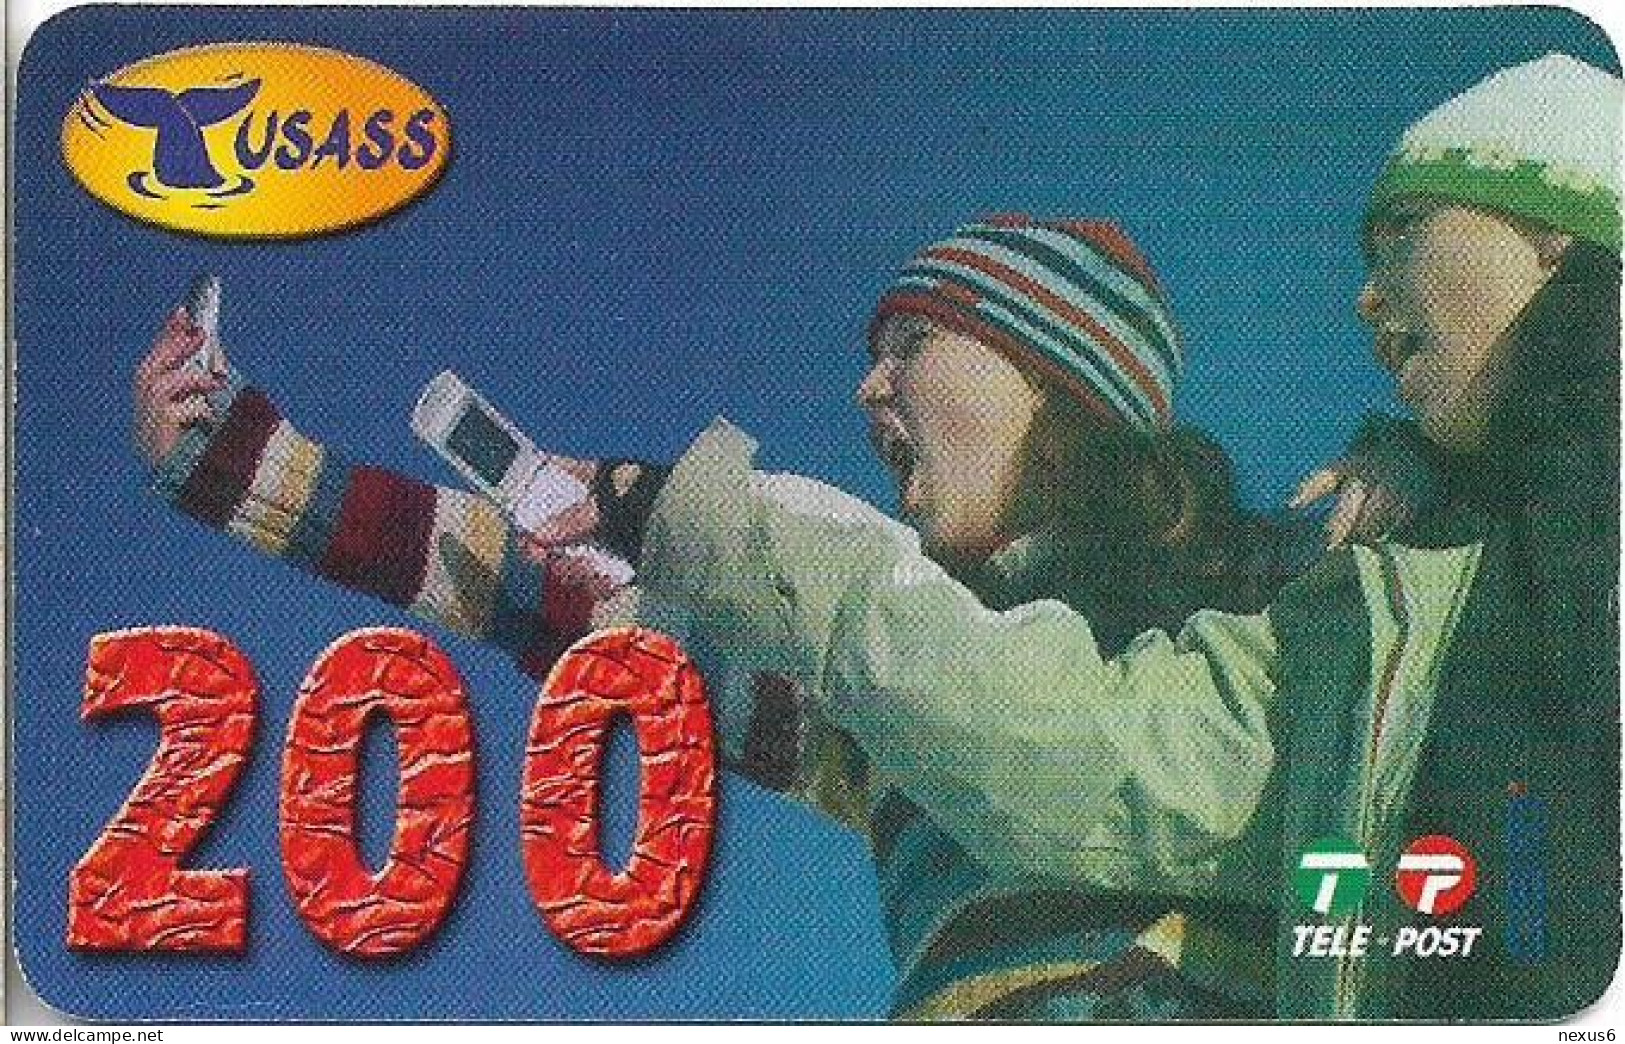 Greenland - Tusass - Two Girls With Mobile, GSM Refill, 200kr. Exp. 04.02.2007, Used - Grönland